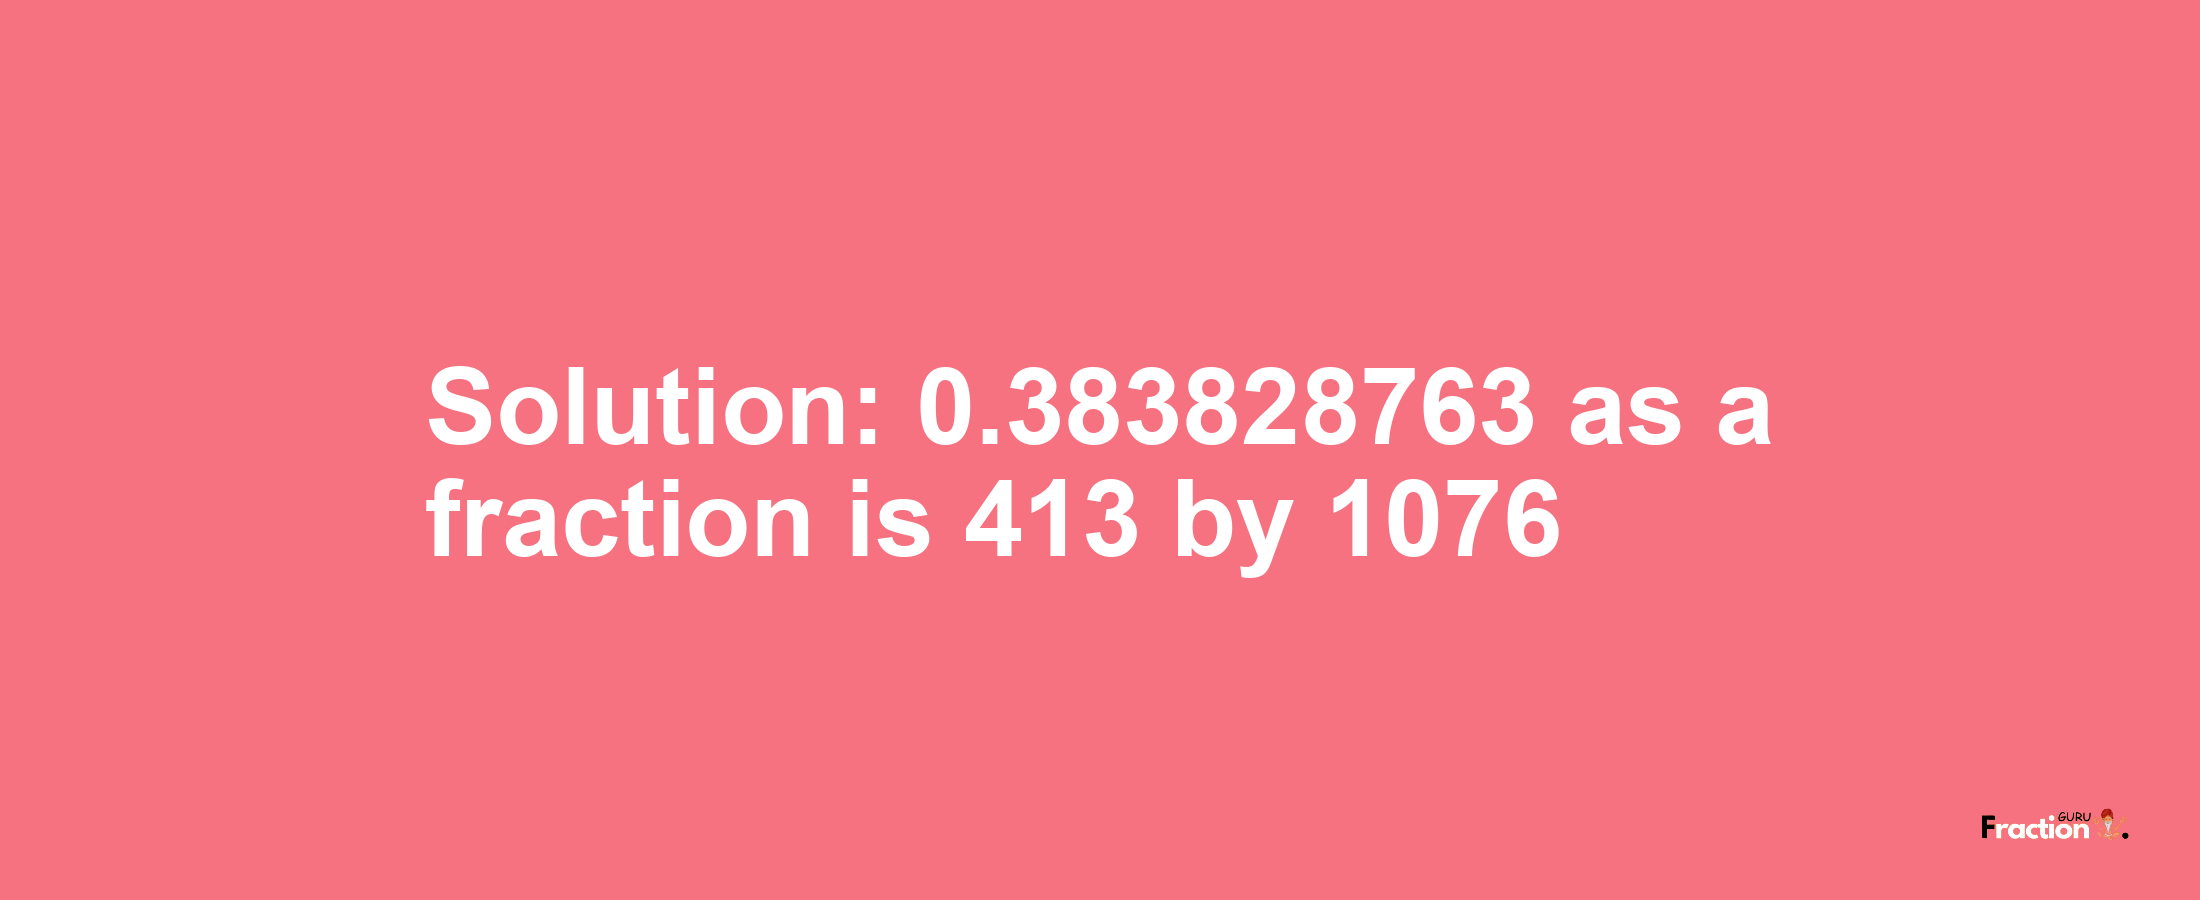 Solution:0.383828763 as a fraction is 413/1076